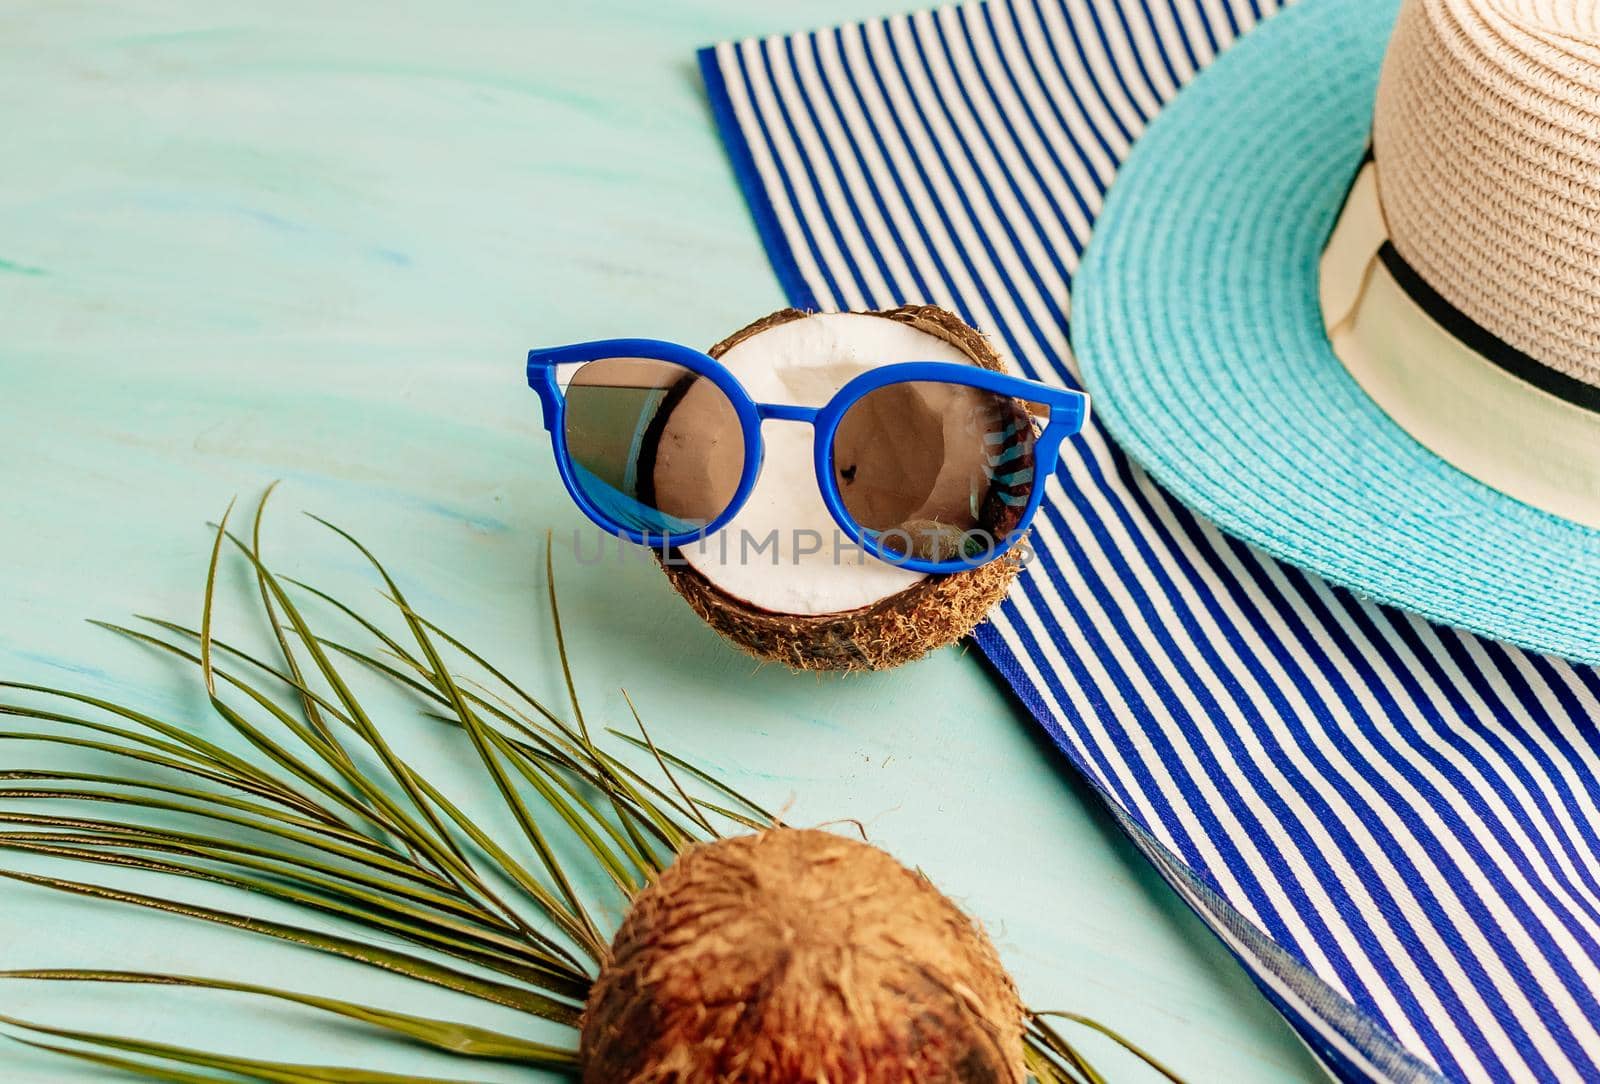 Summer composition or layout. Tropical palm leaves, hat, glasses, beach towel, coconut on a background of sea greens. The concept of the summer season and heat. Flat lay, top view, copy space by Alla_Morozova93